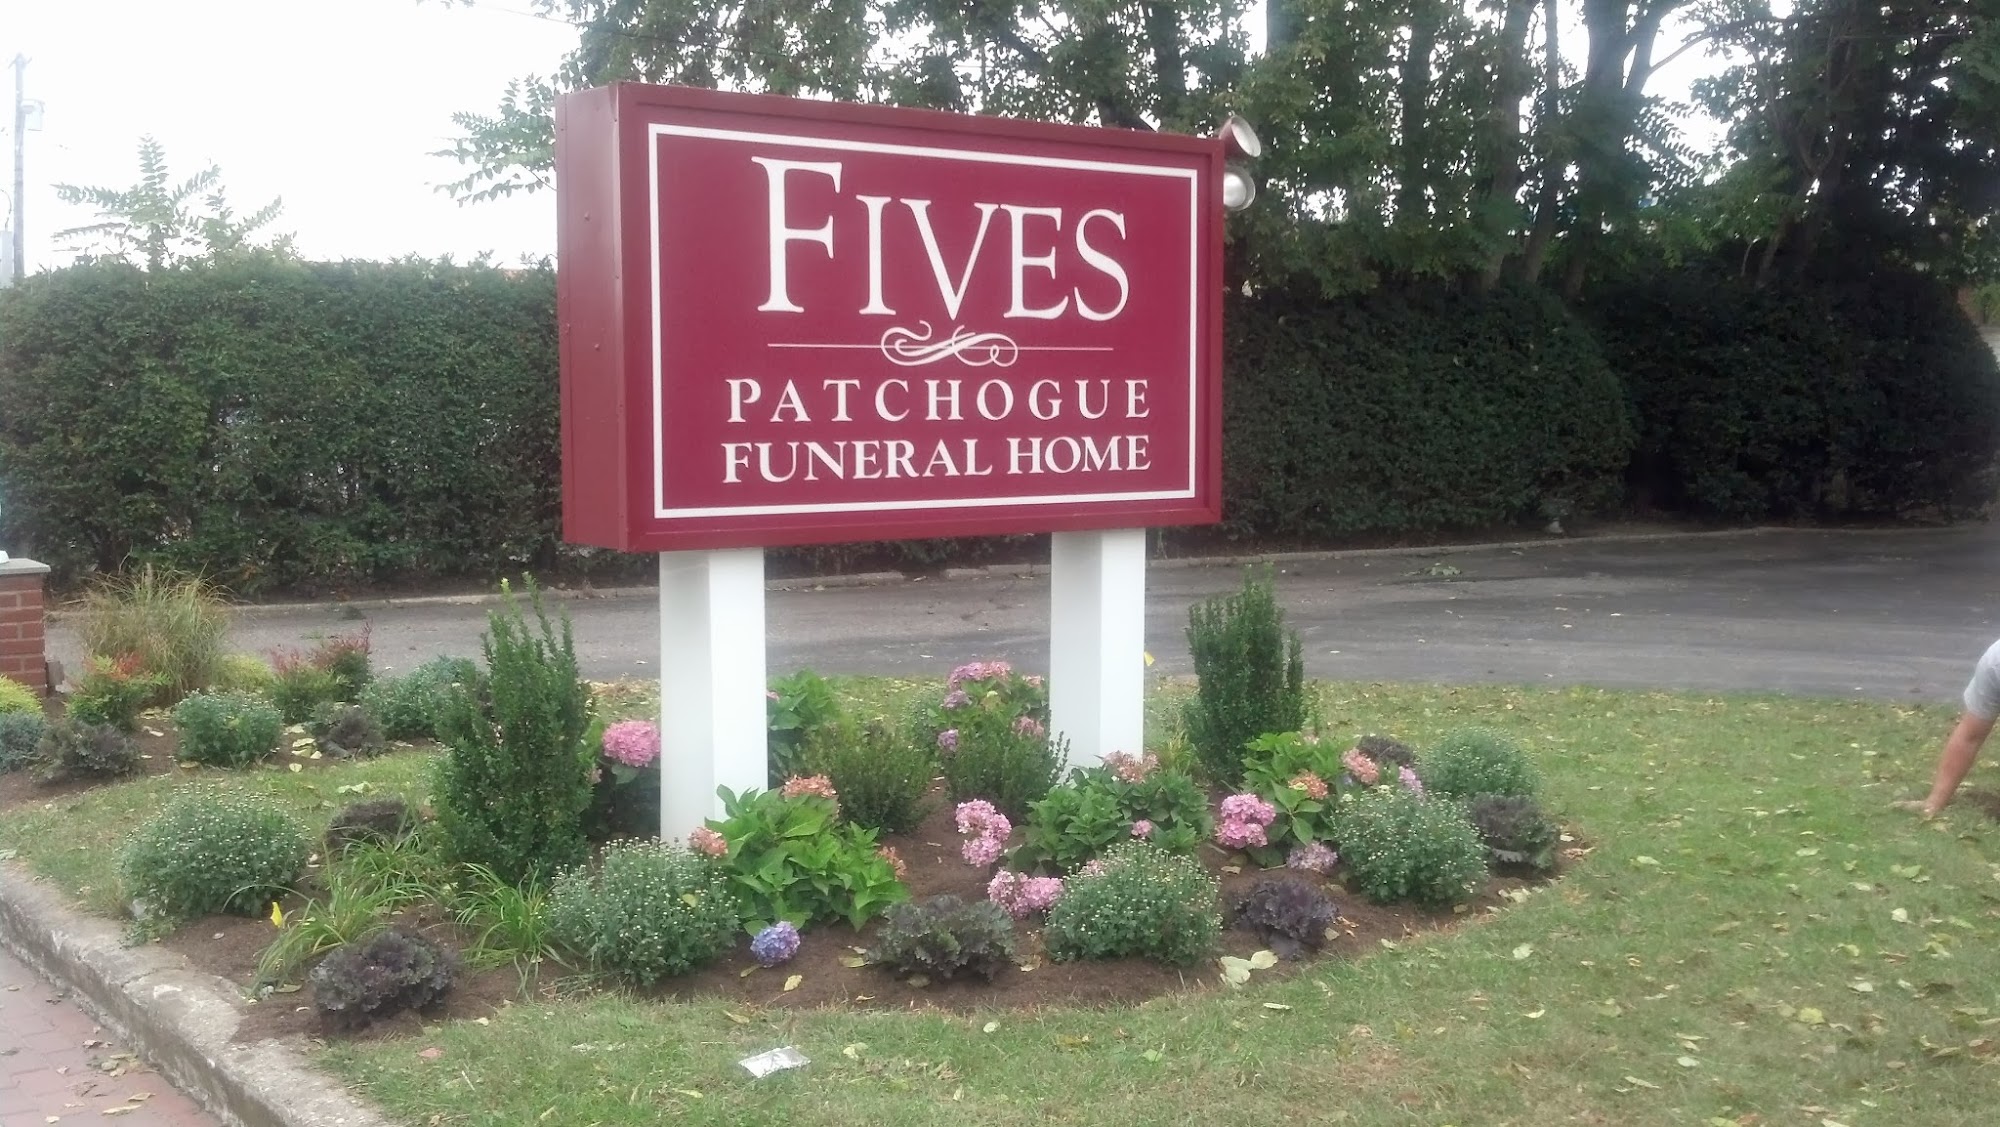 Fives Smithtown Funeral Home and Cremation Services